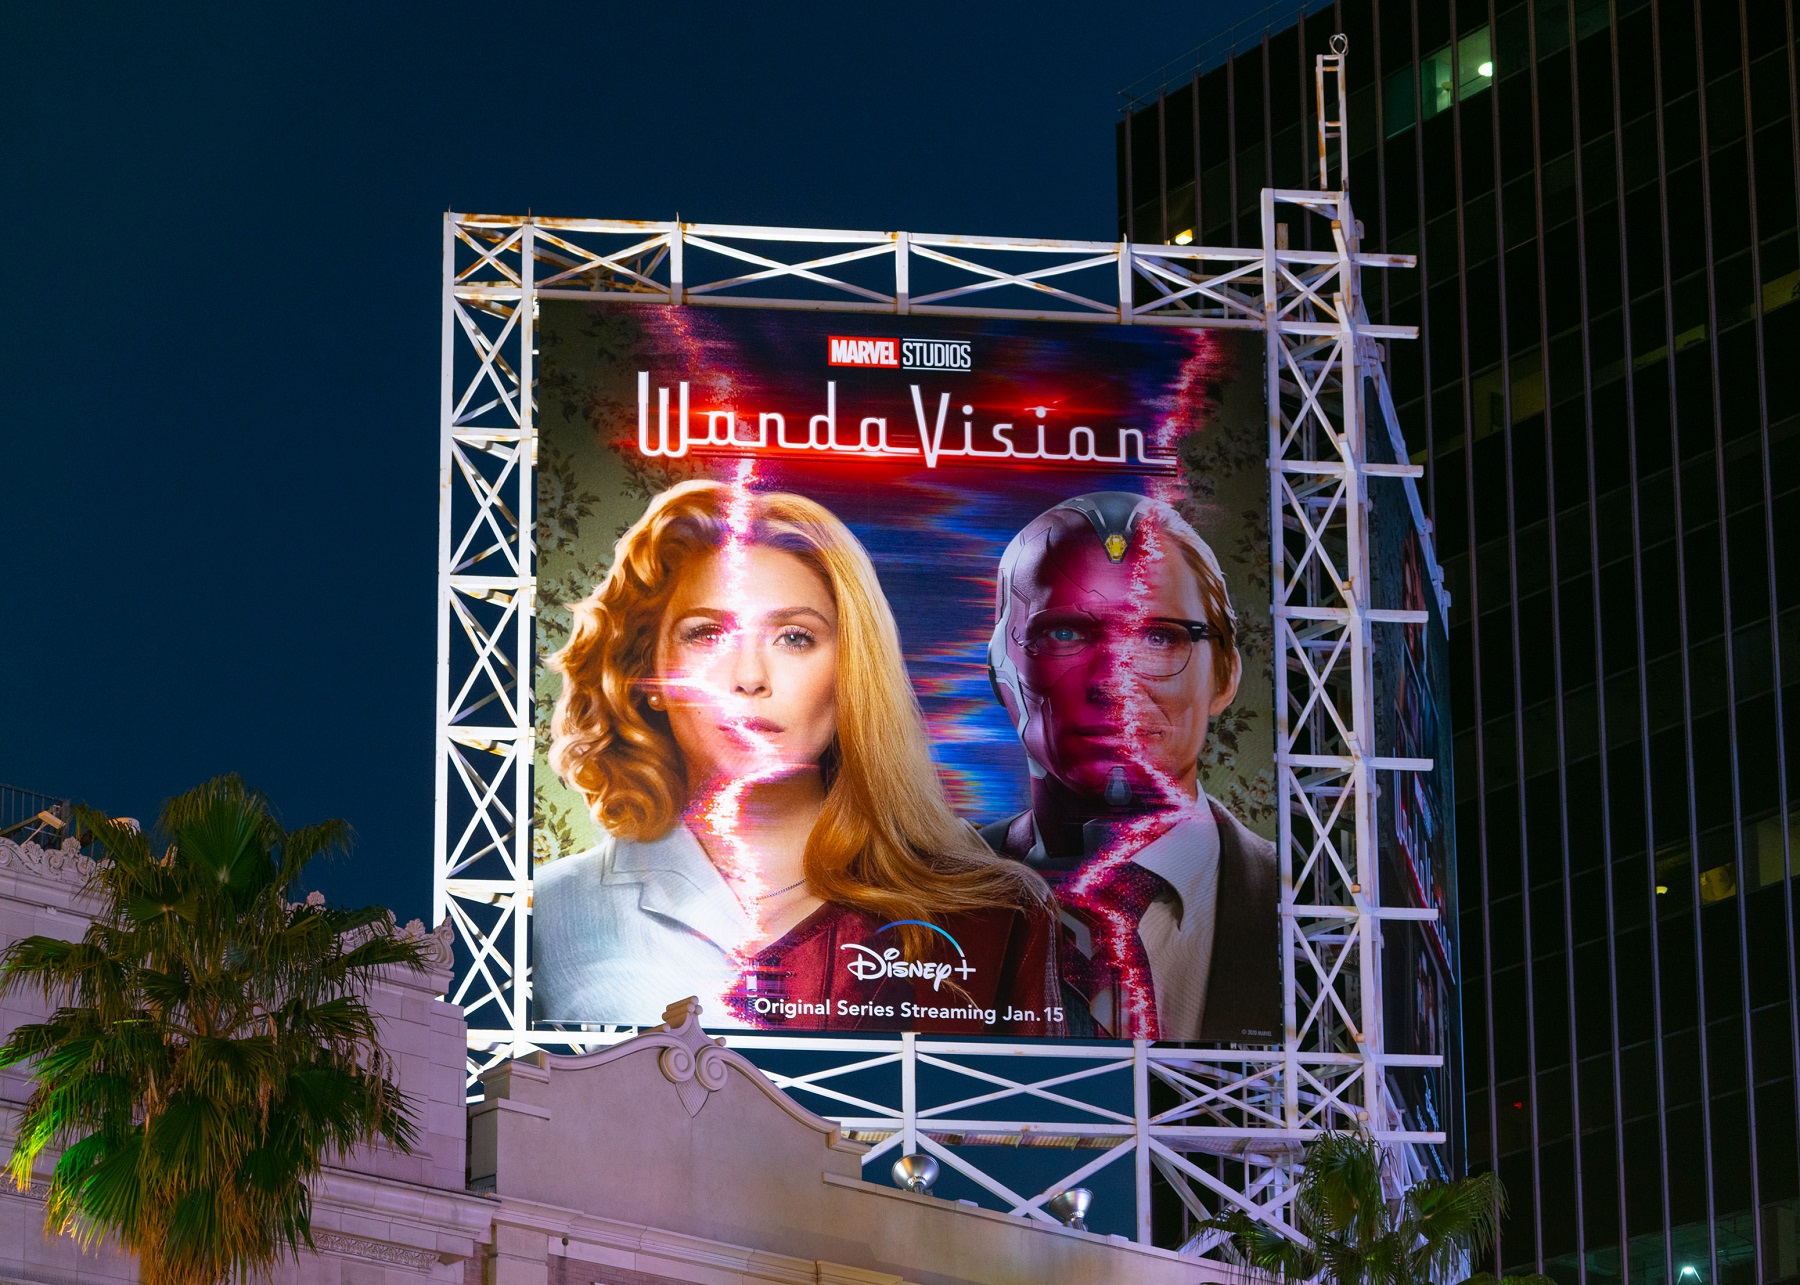 2021 Emmy predictions focus on WandaVision - a sign for WandaVision overlooking Hollywood Blvd. is pictured here